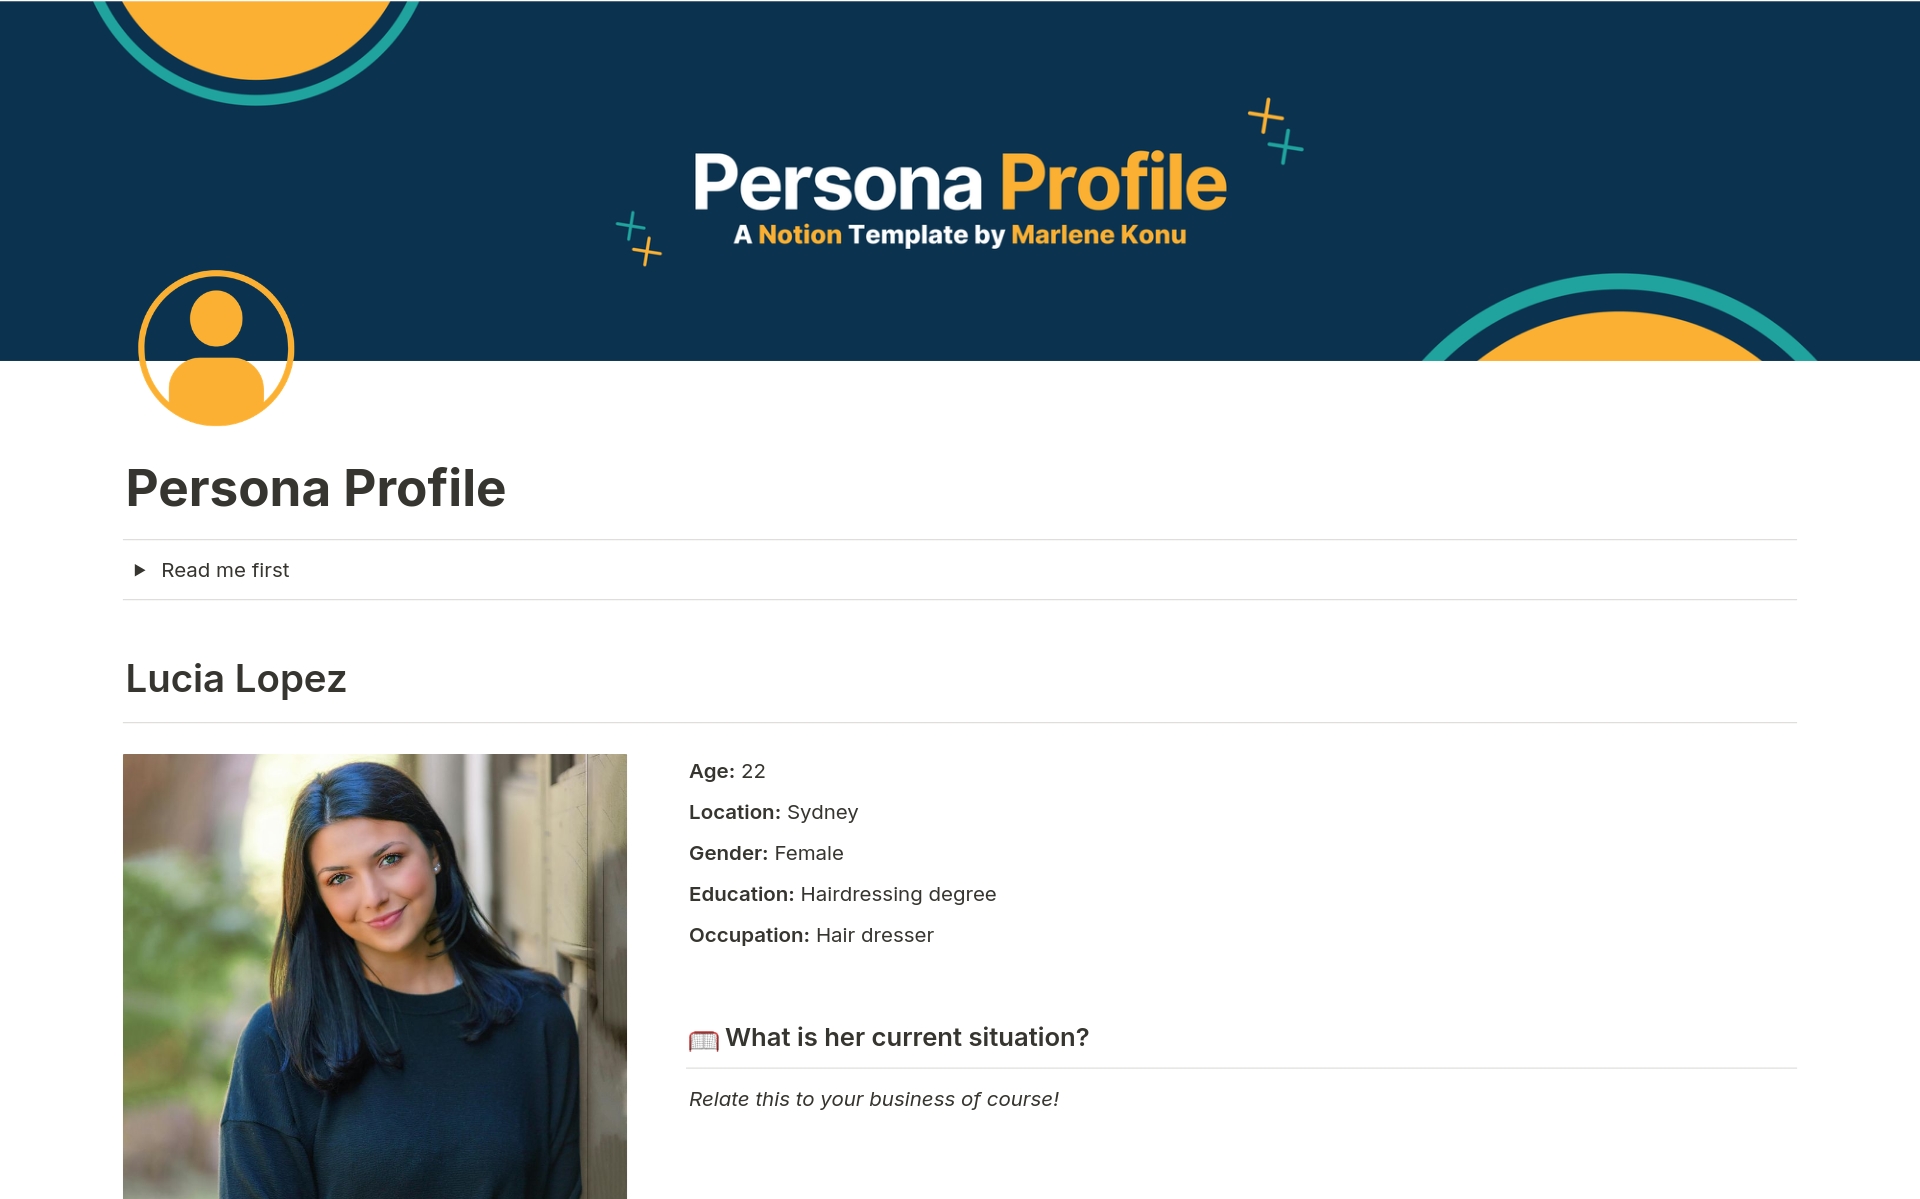 A Persona Profile is a vivid snapshot of your ideal customer, capturing their demographics, behaviors, goals, and challenges. It's not just data on a page - it's a relatable character that brings your target audience to life.